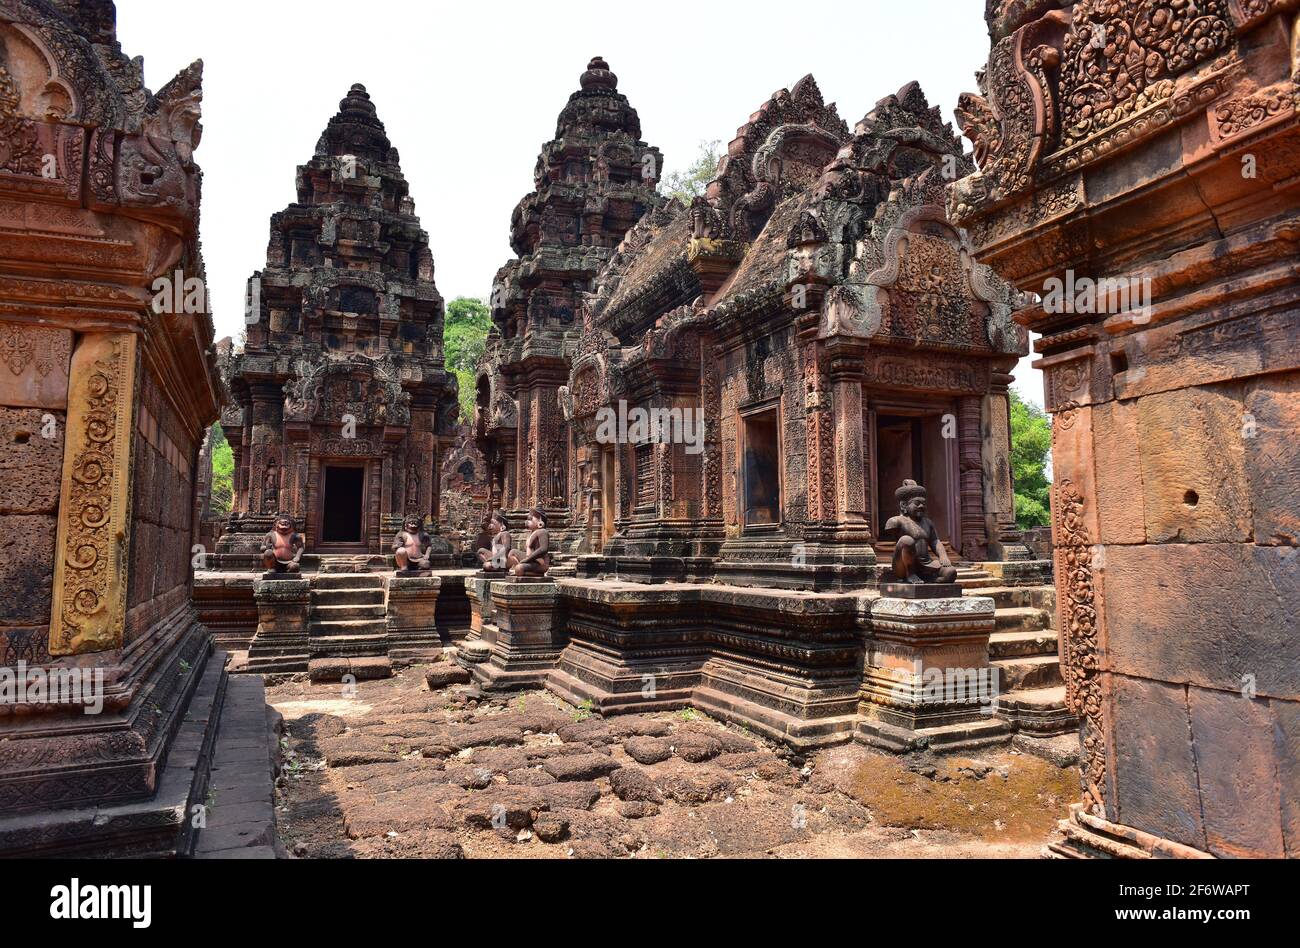 Banteay Srei or Banteay Srey is an hindu temple dedicated to Shiva, from 10th century. Angkor, Cambodia. Stock Photo